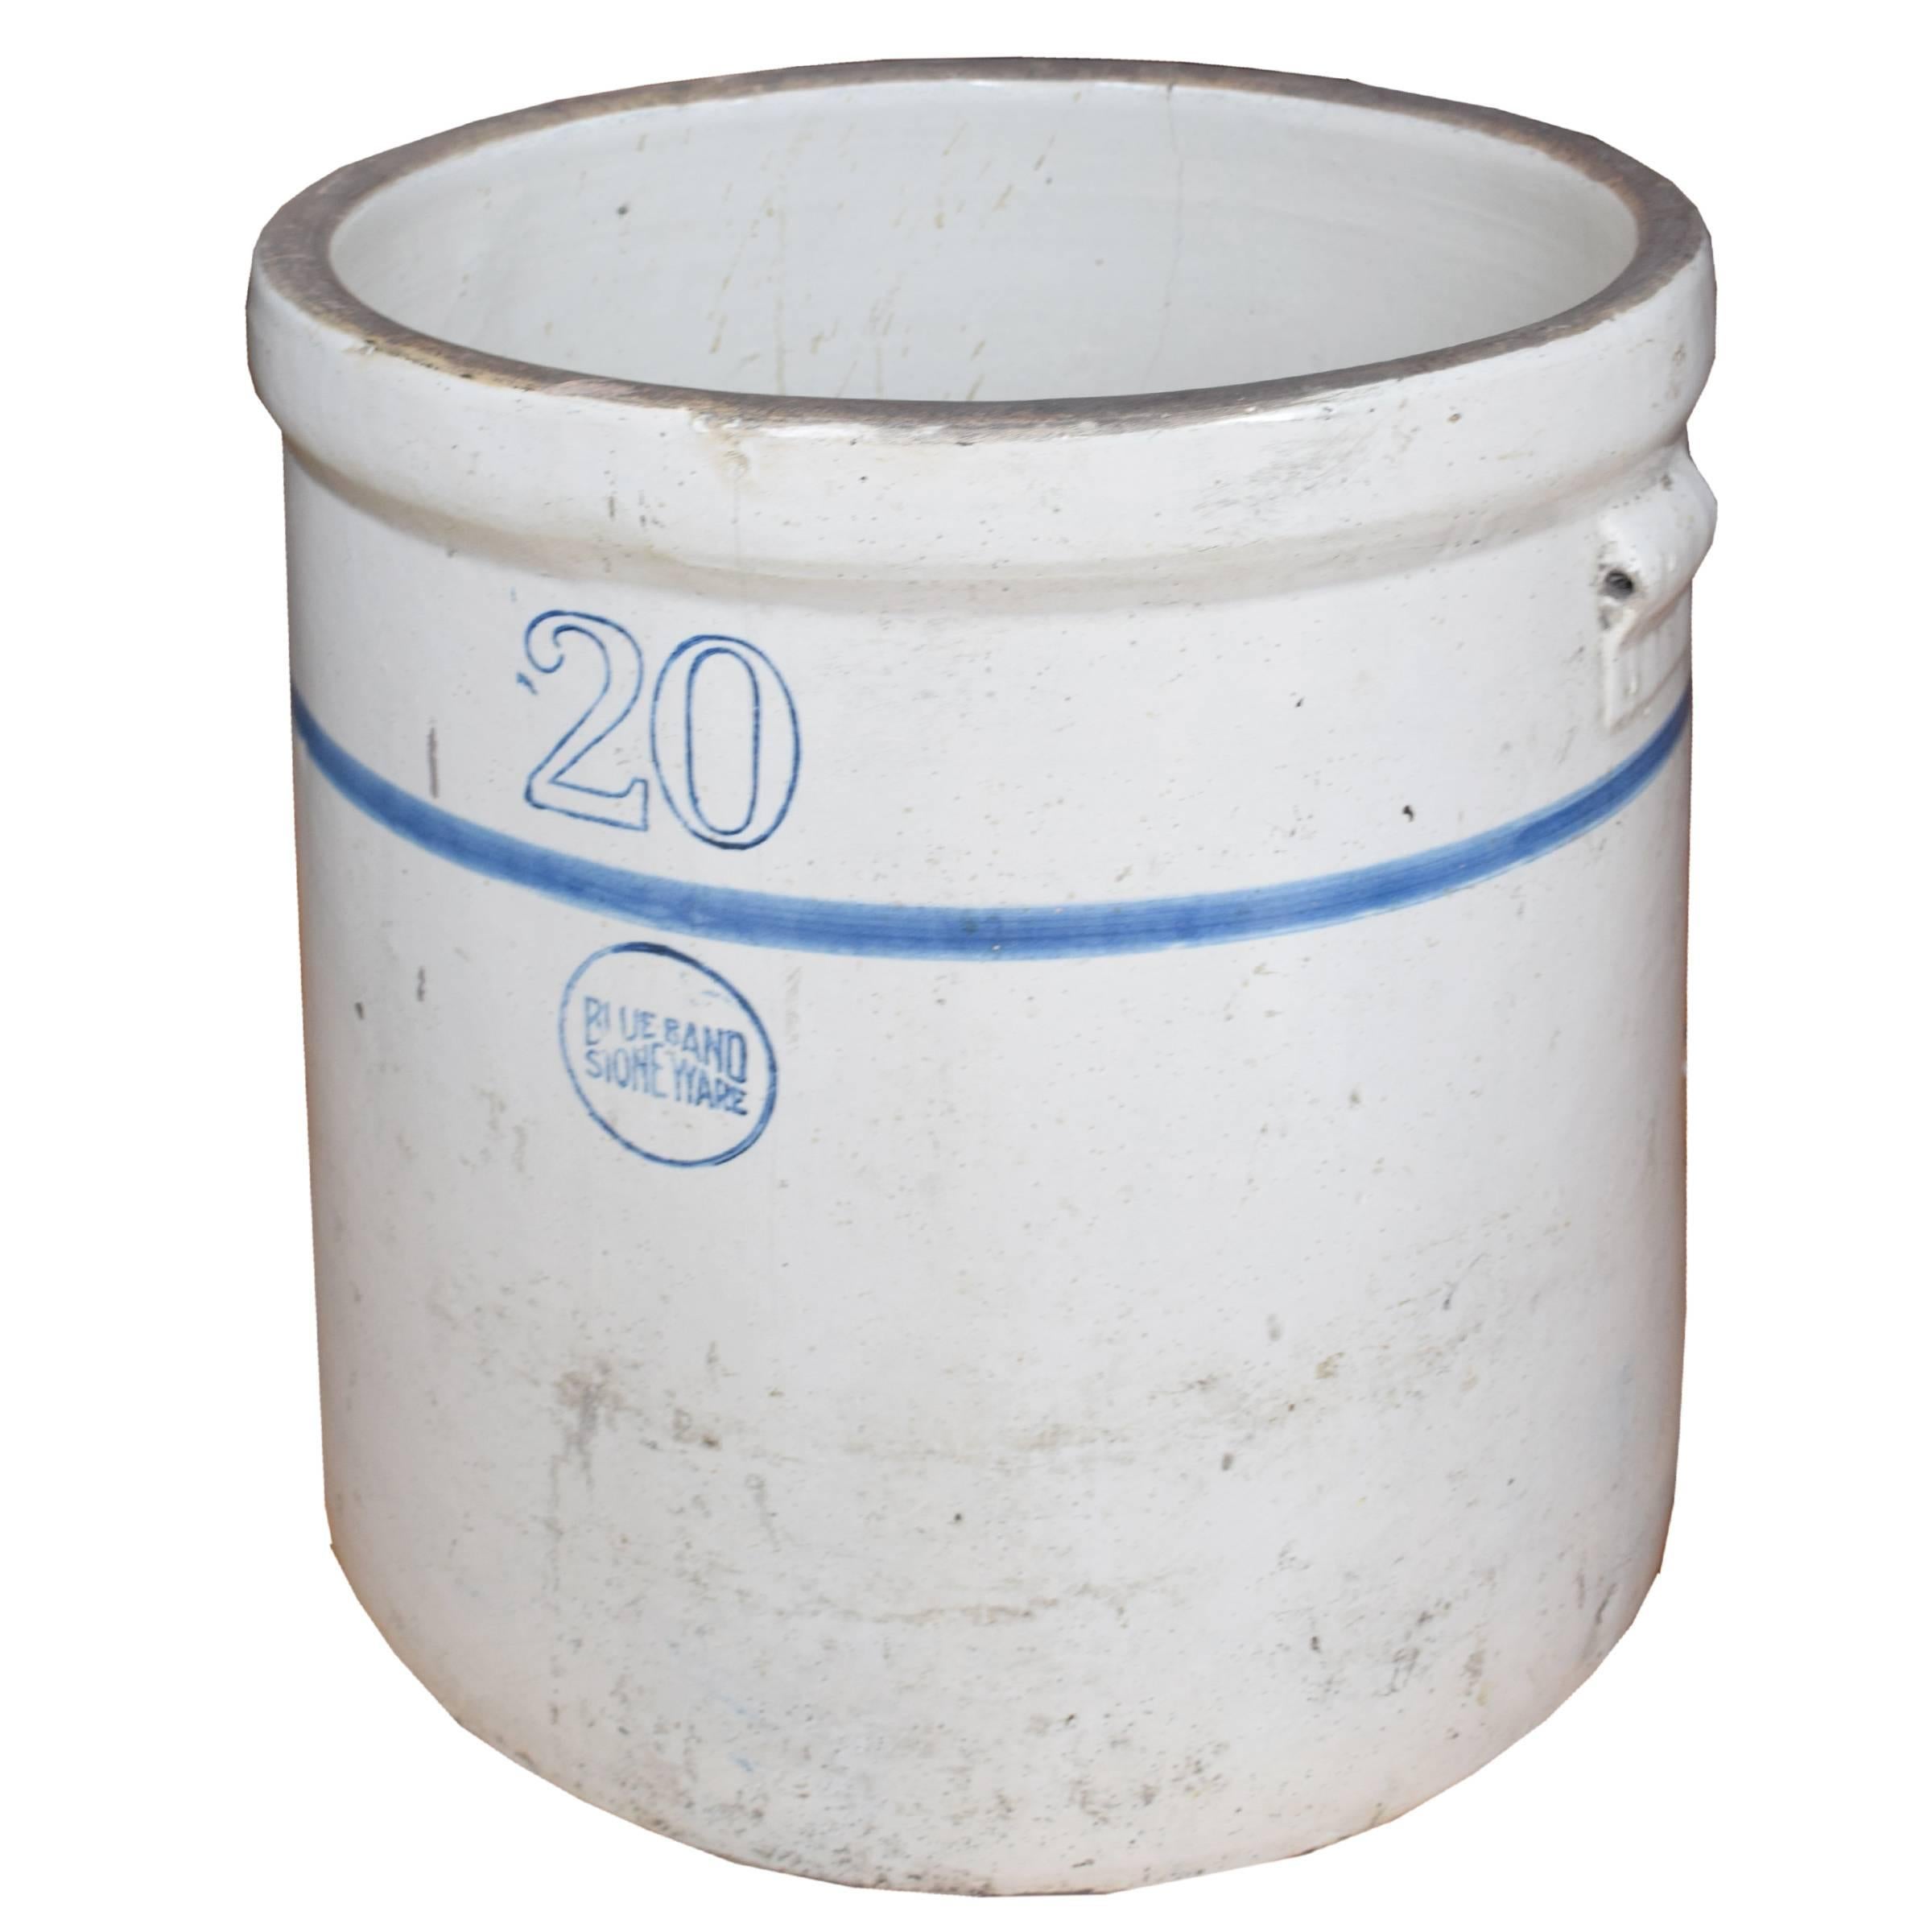 An American blue band stoneware glazed crock with a 20 gallon capacity. Marked with a large '20', a crisp blue band and the blue band stoneware logo, circa 1900.
                          